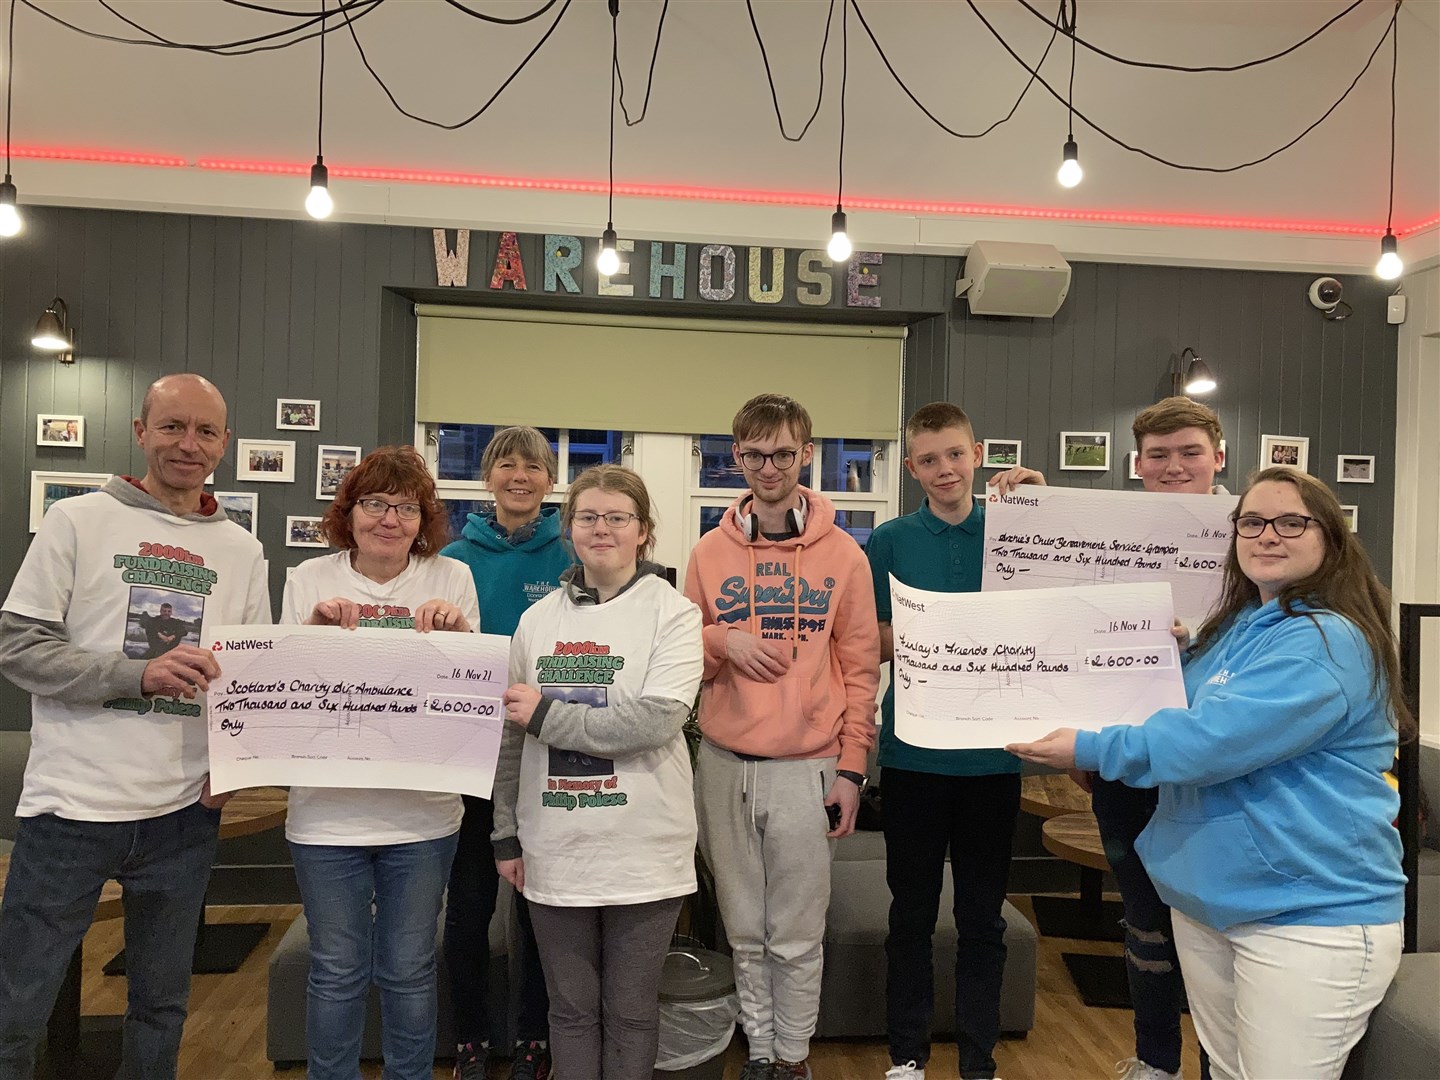 Philip Polese's parents with young people who took part in the fundraiser at The Warehouse@EYC. (Front from left) Eddie and Kay Polese, Abigail Little, Ben Scott, Riley McLaggan, Kenzie Stephen, volunteer Audrey Green and (back row) youth worker Donna Breen.